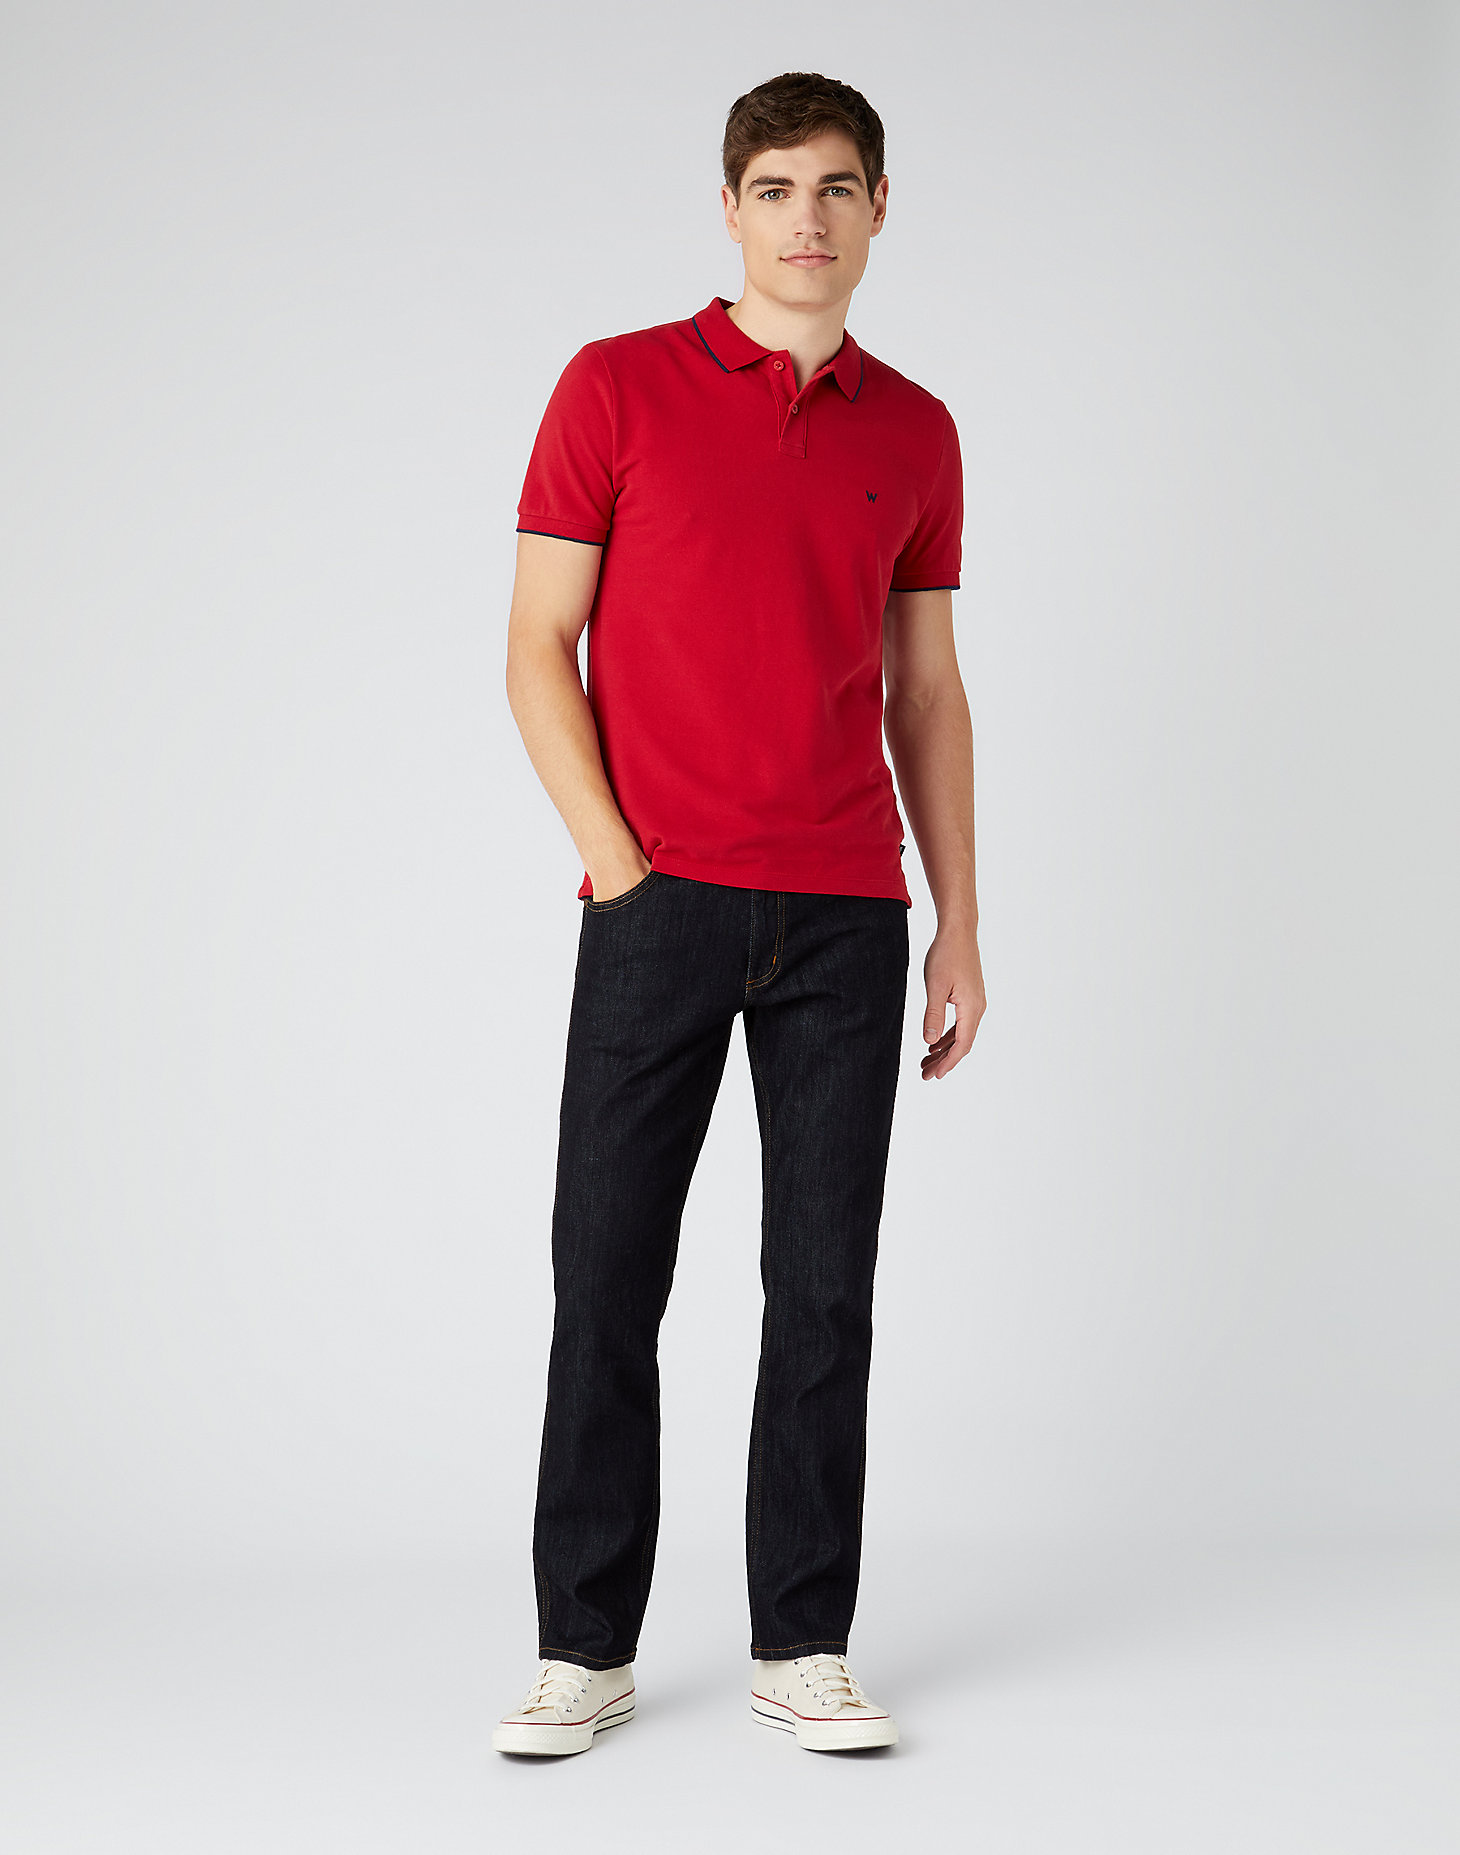 Short Sleeve Pique Polo in Red alternative view 1